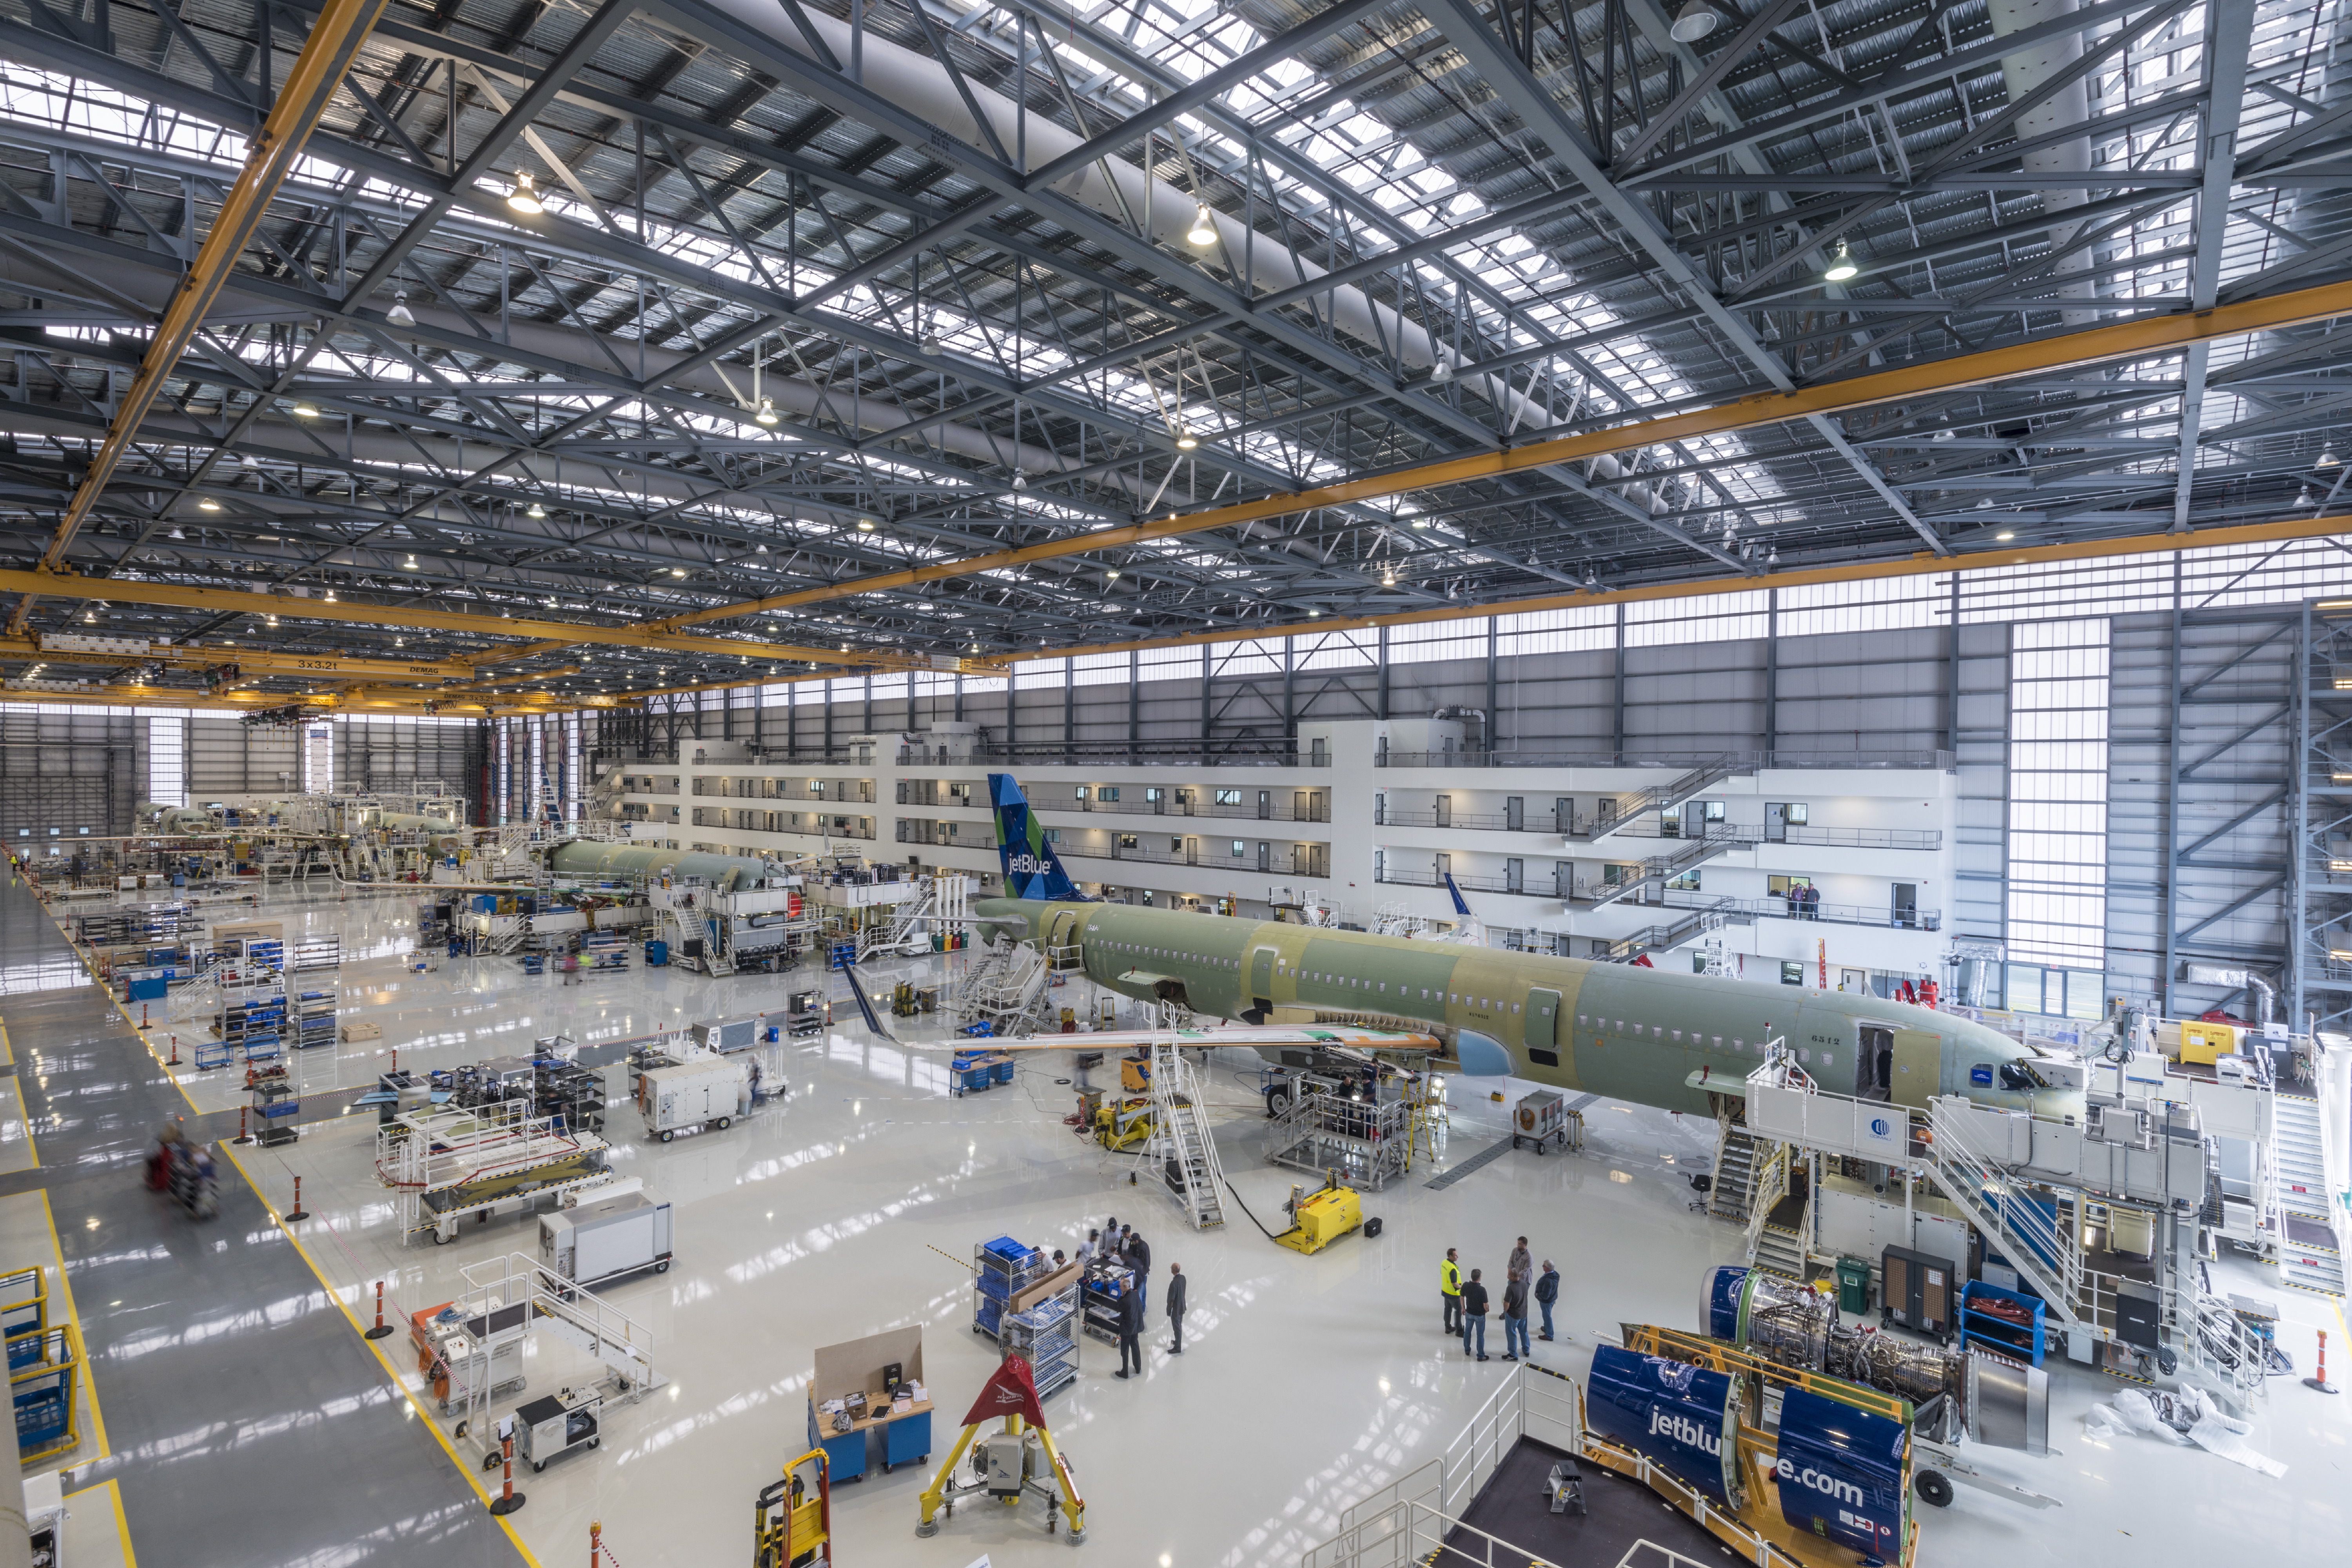 Interior view of Airbus A220 aircraft manufacturing facility